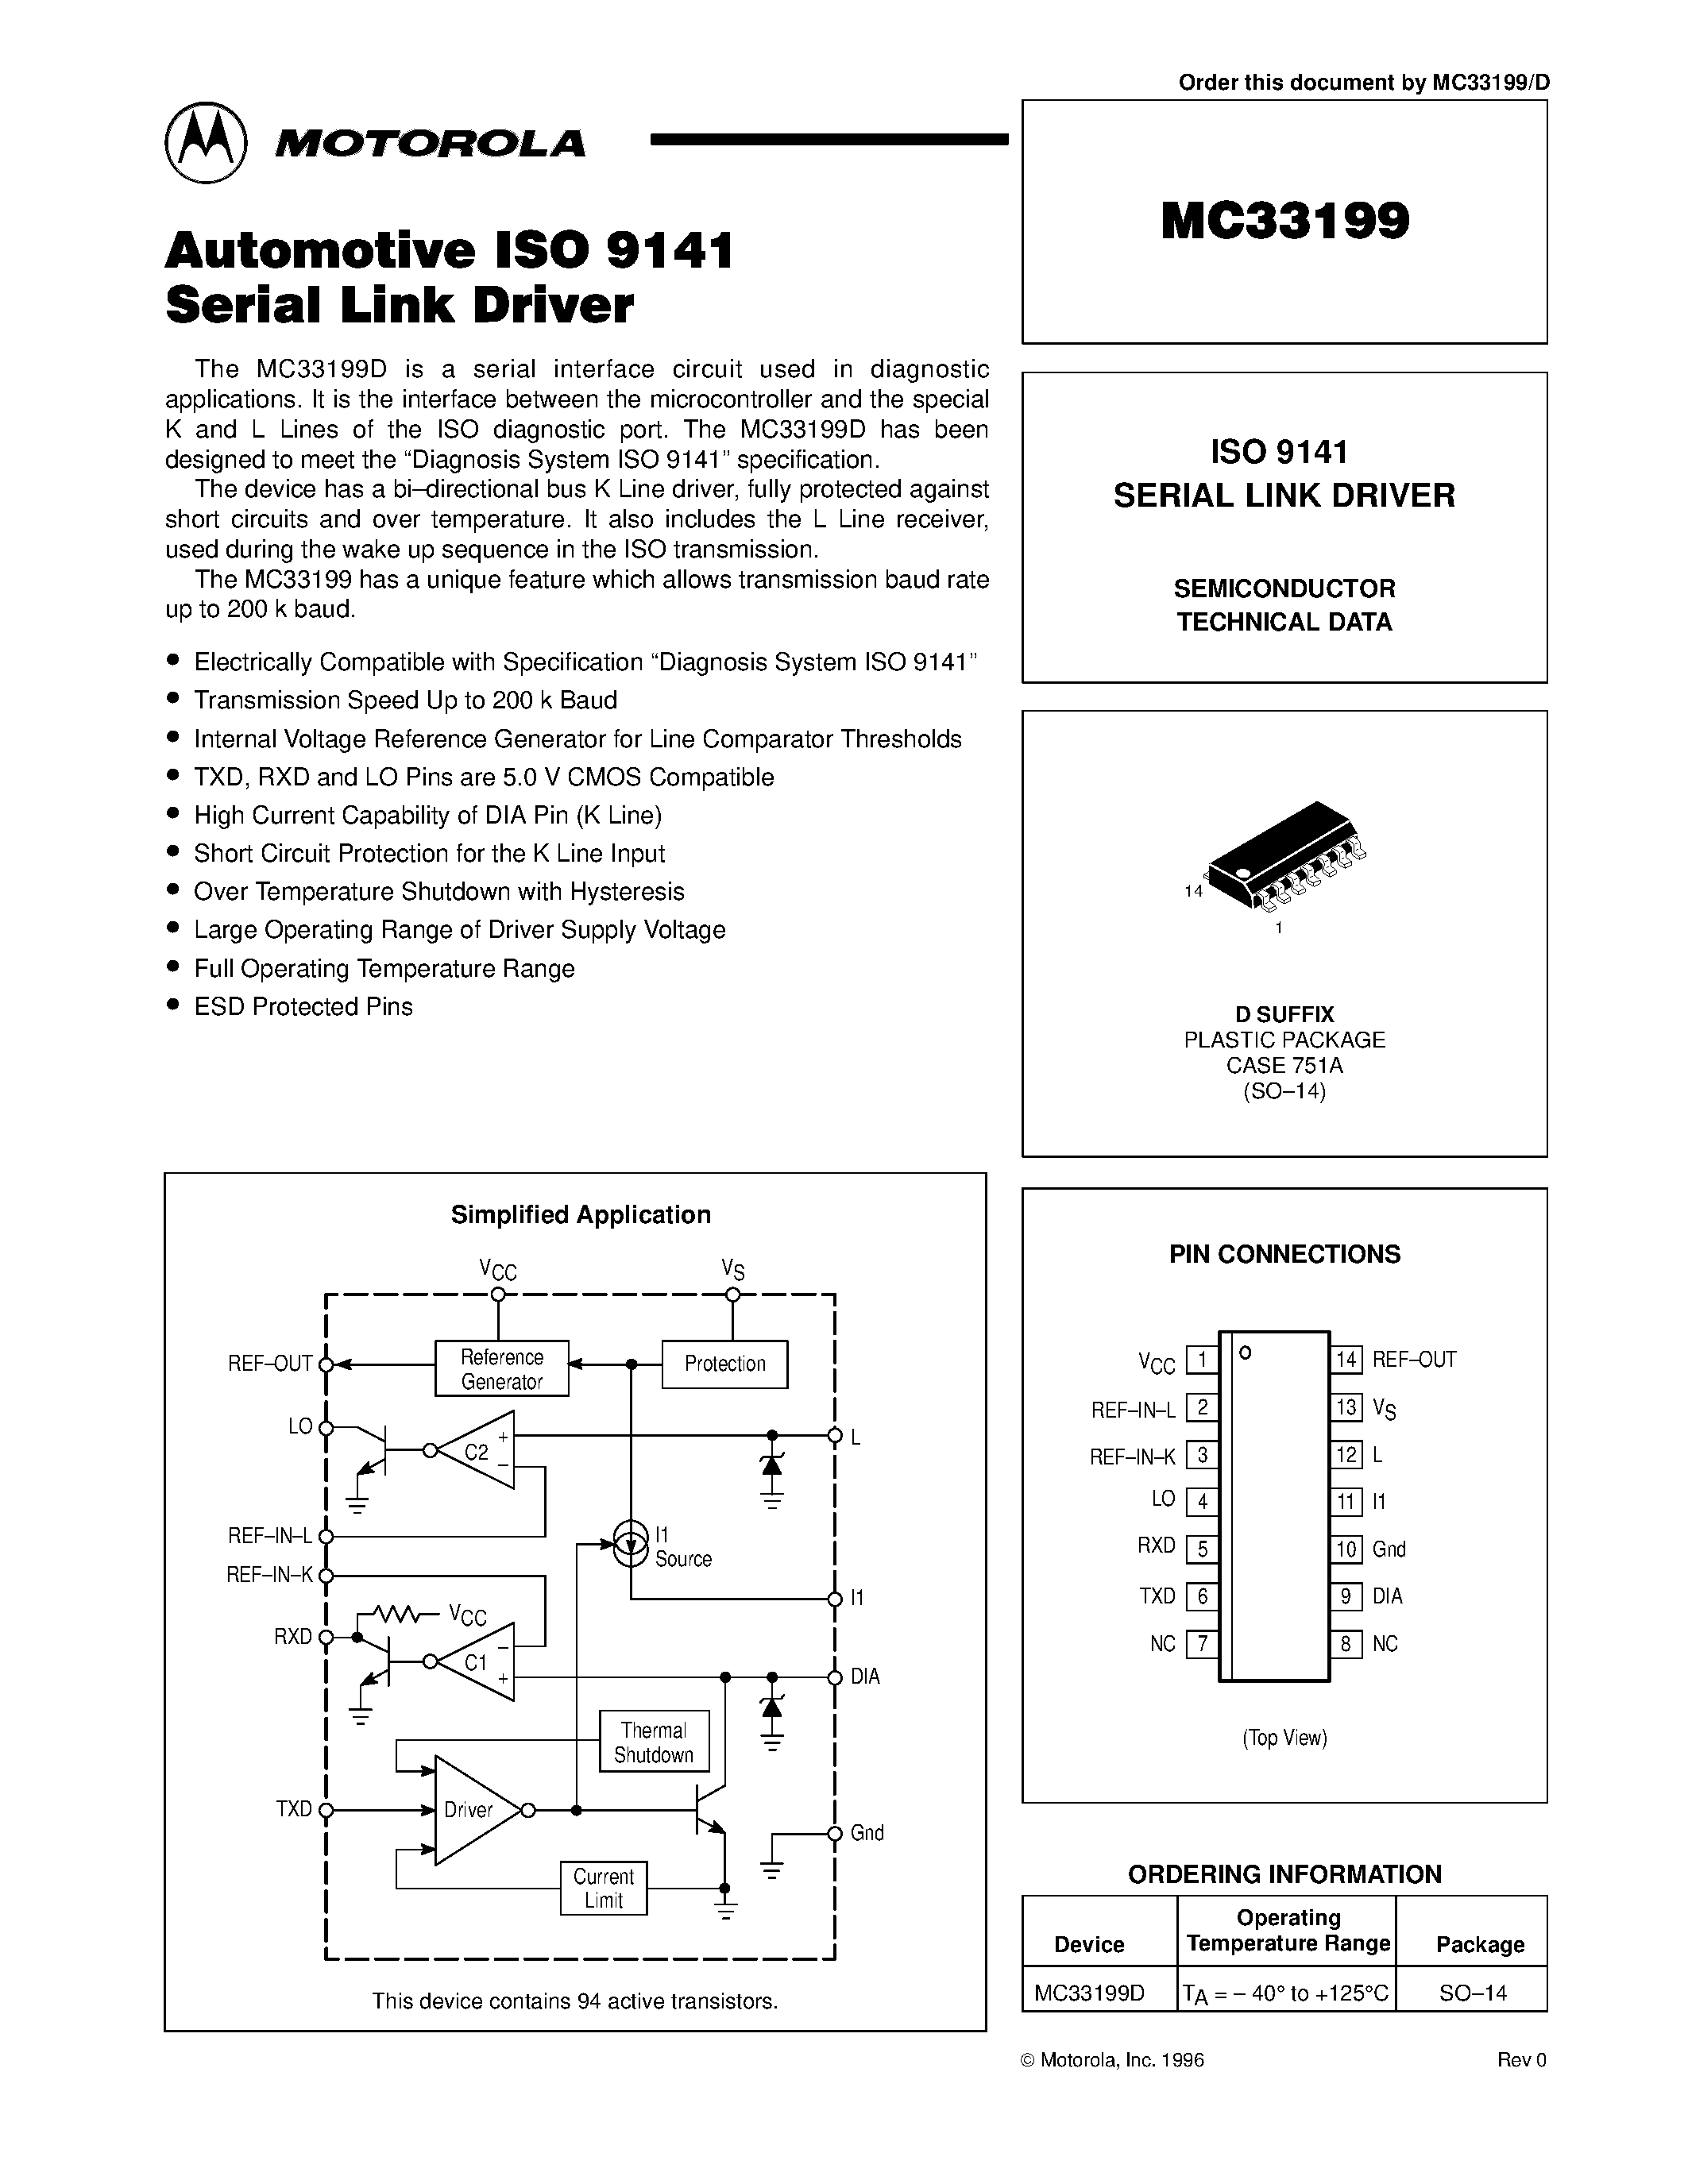 Datasheet MC33199 - ISO 9141 SERIAL LINK DRIVER page 1